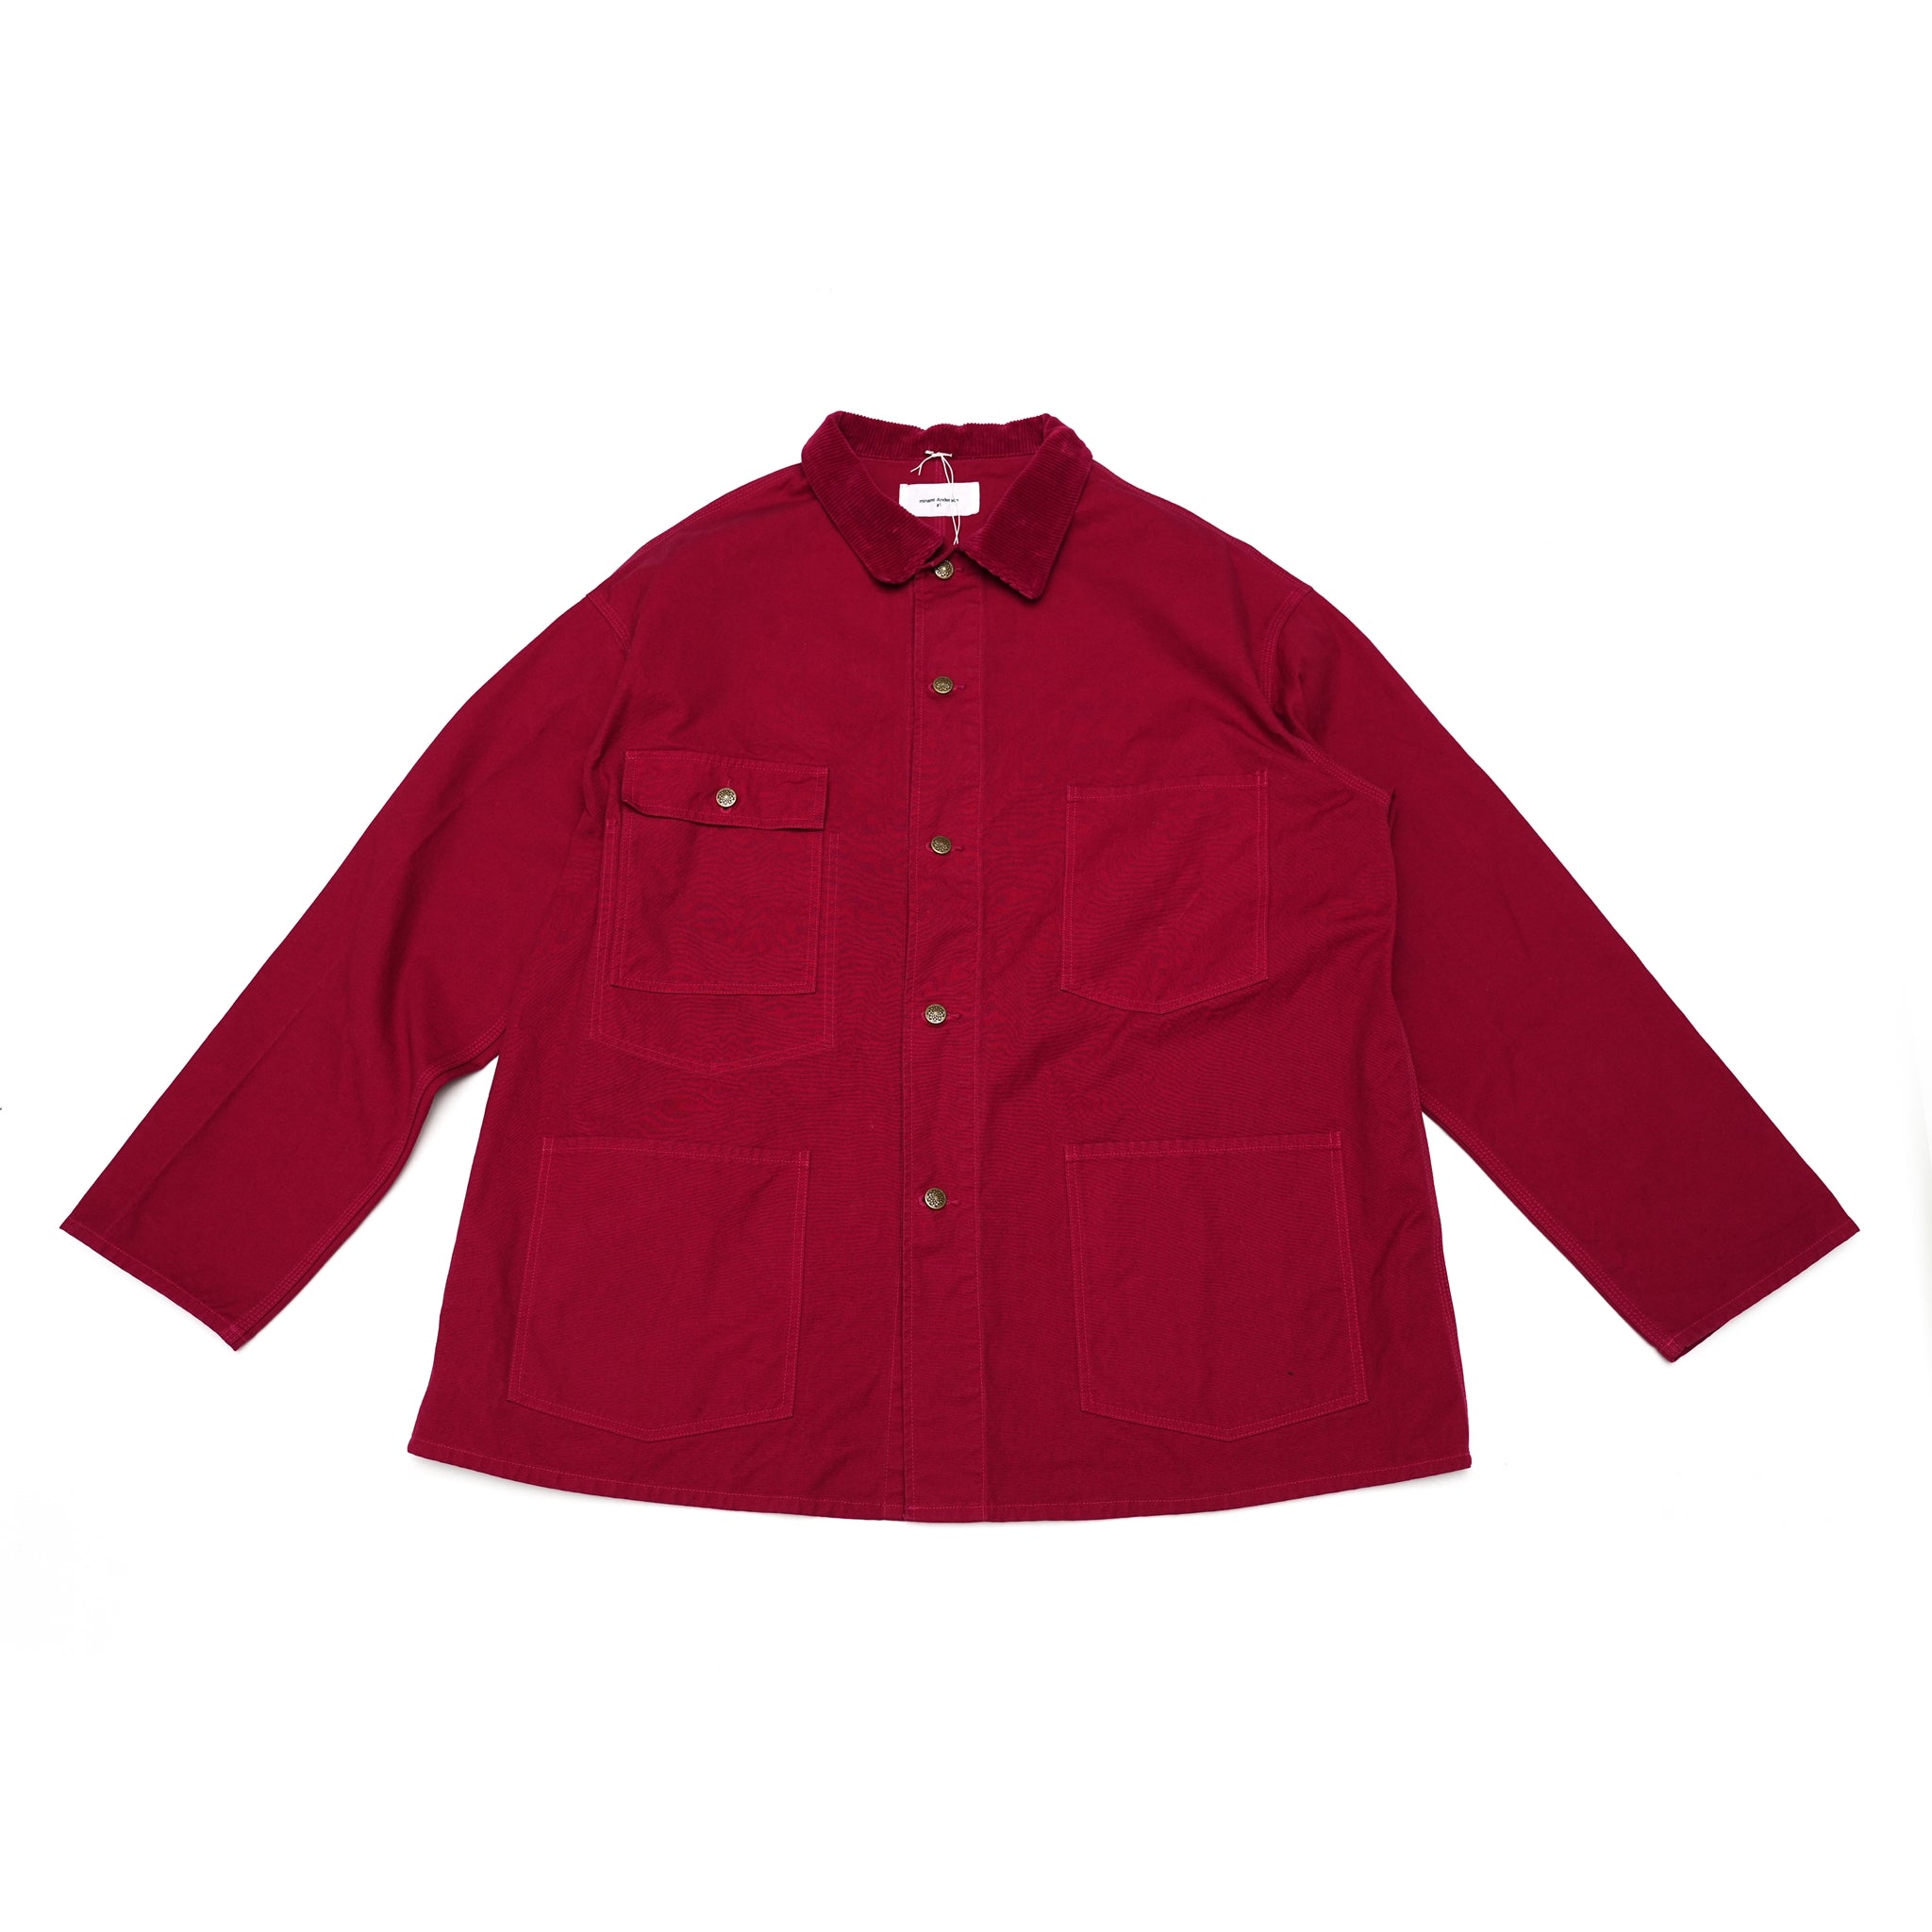 No:23＃01373-5110 | Name:CANVAS COVERALL Vintage 60’S | Color:レッド【MINAMI ANDERSON_ミナミアンダーソン】